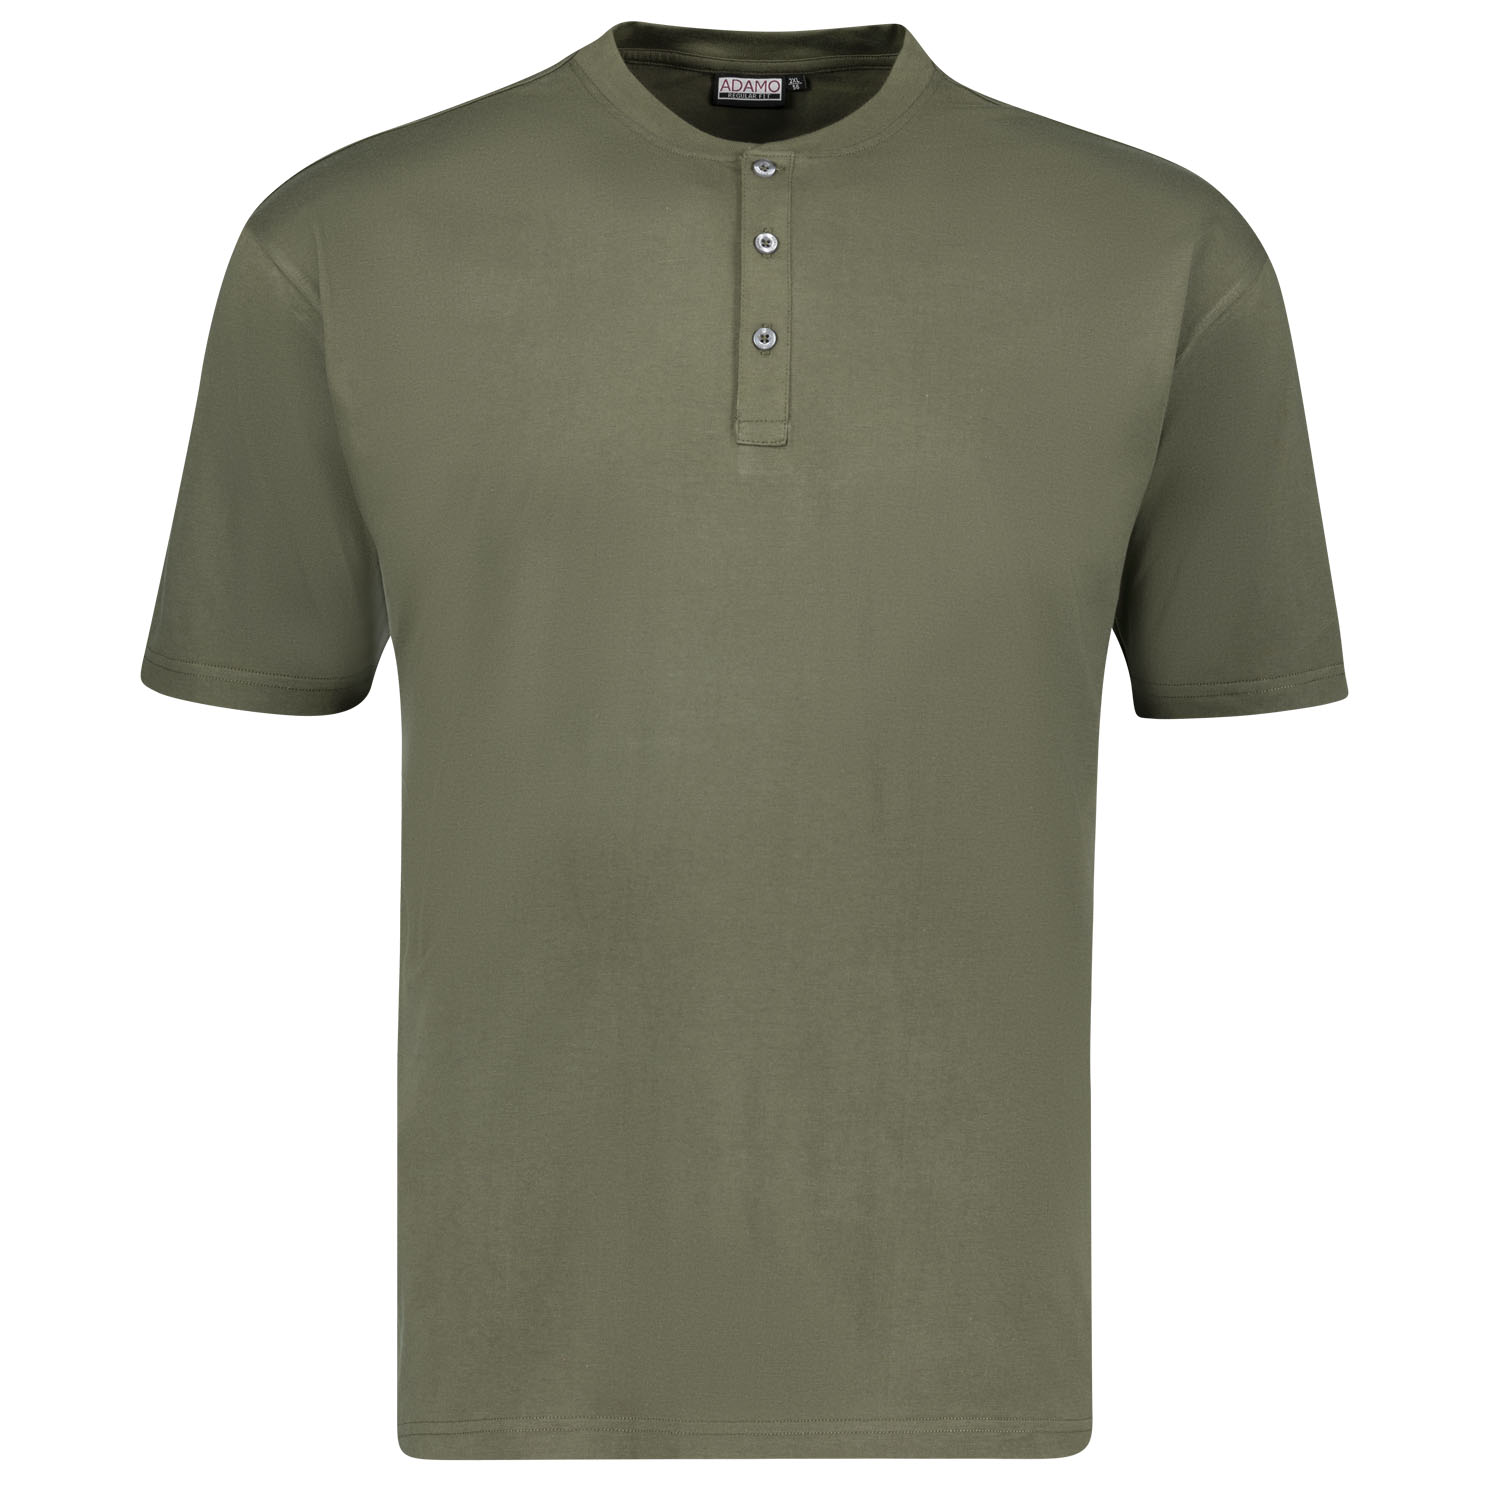 T-shirt in olive series Silas regular fit by Adamo for men up to oversize 10XL